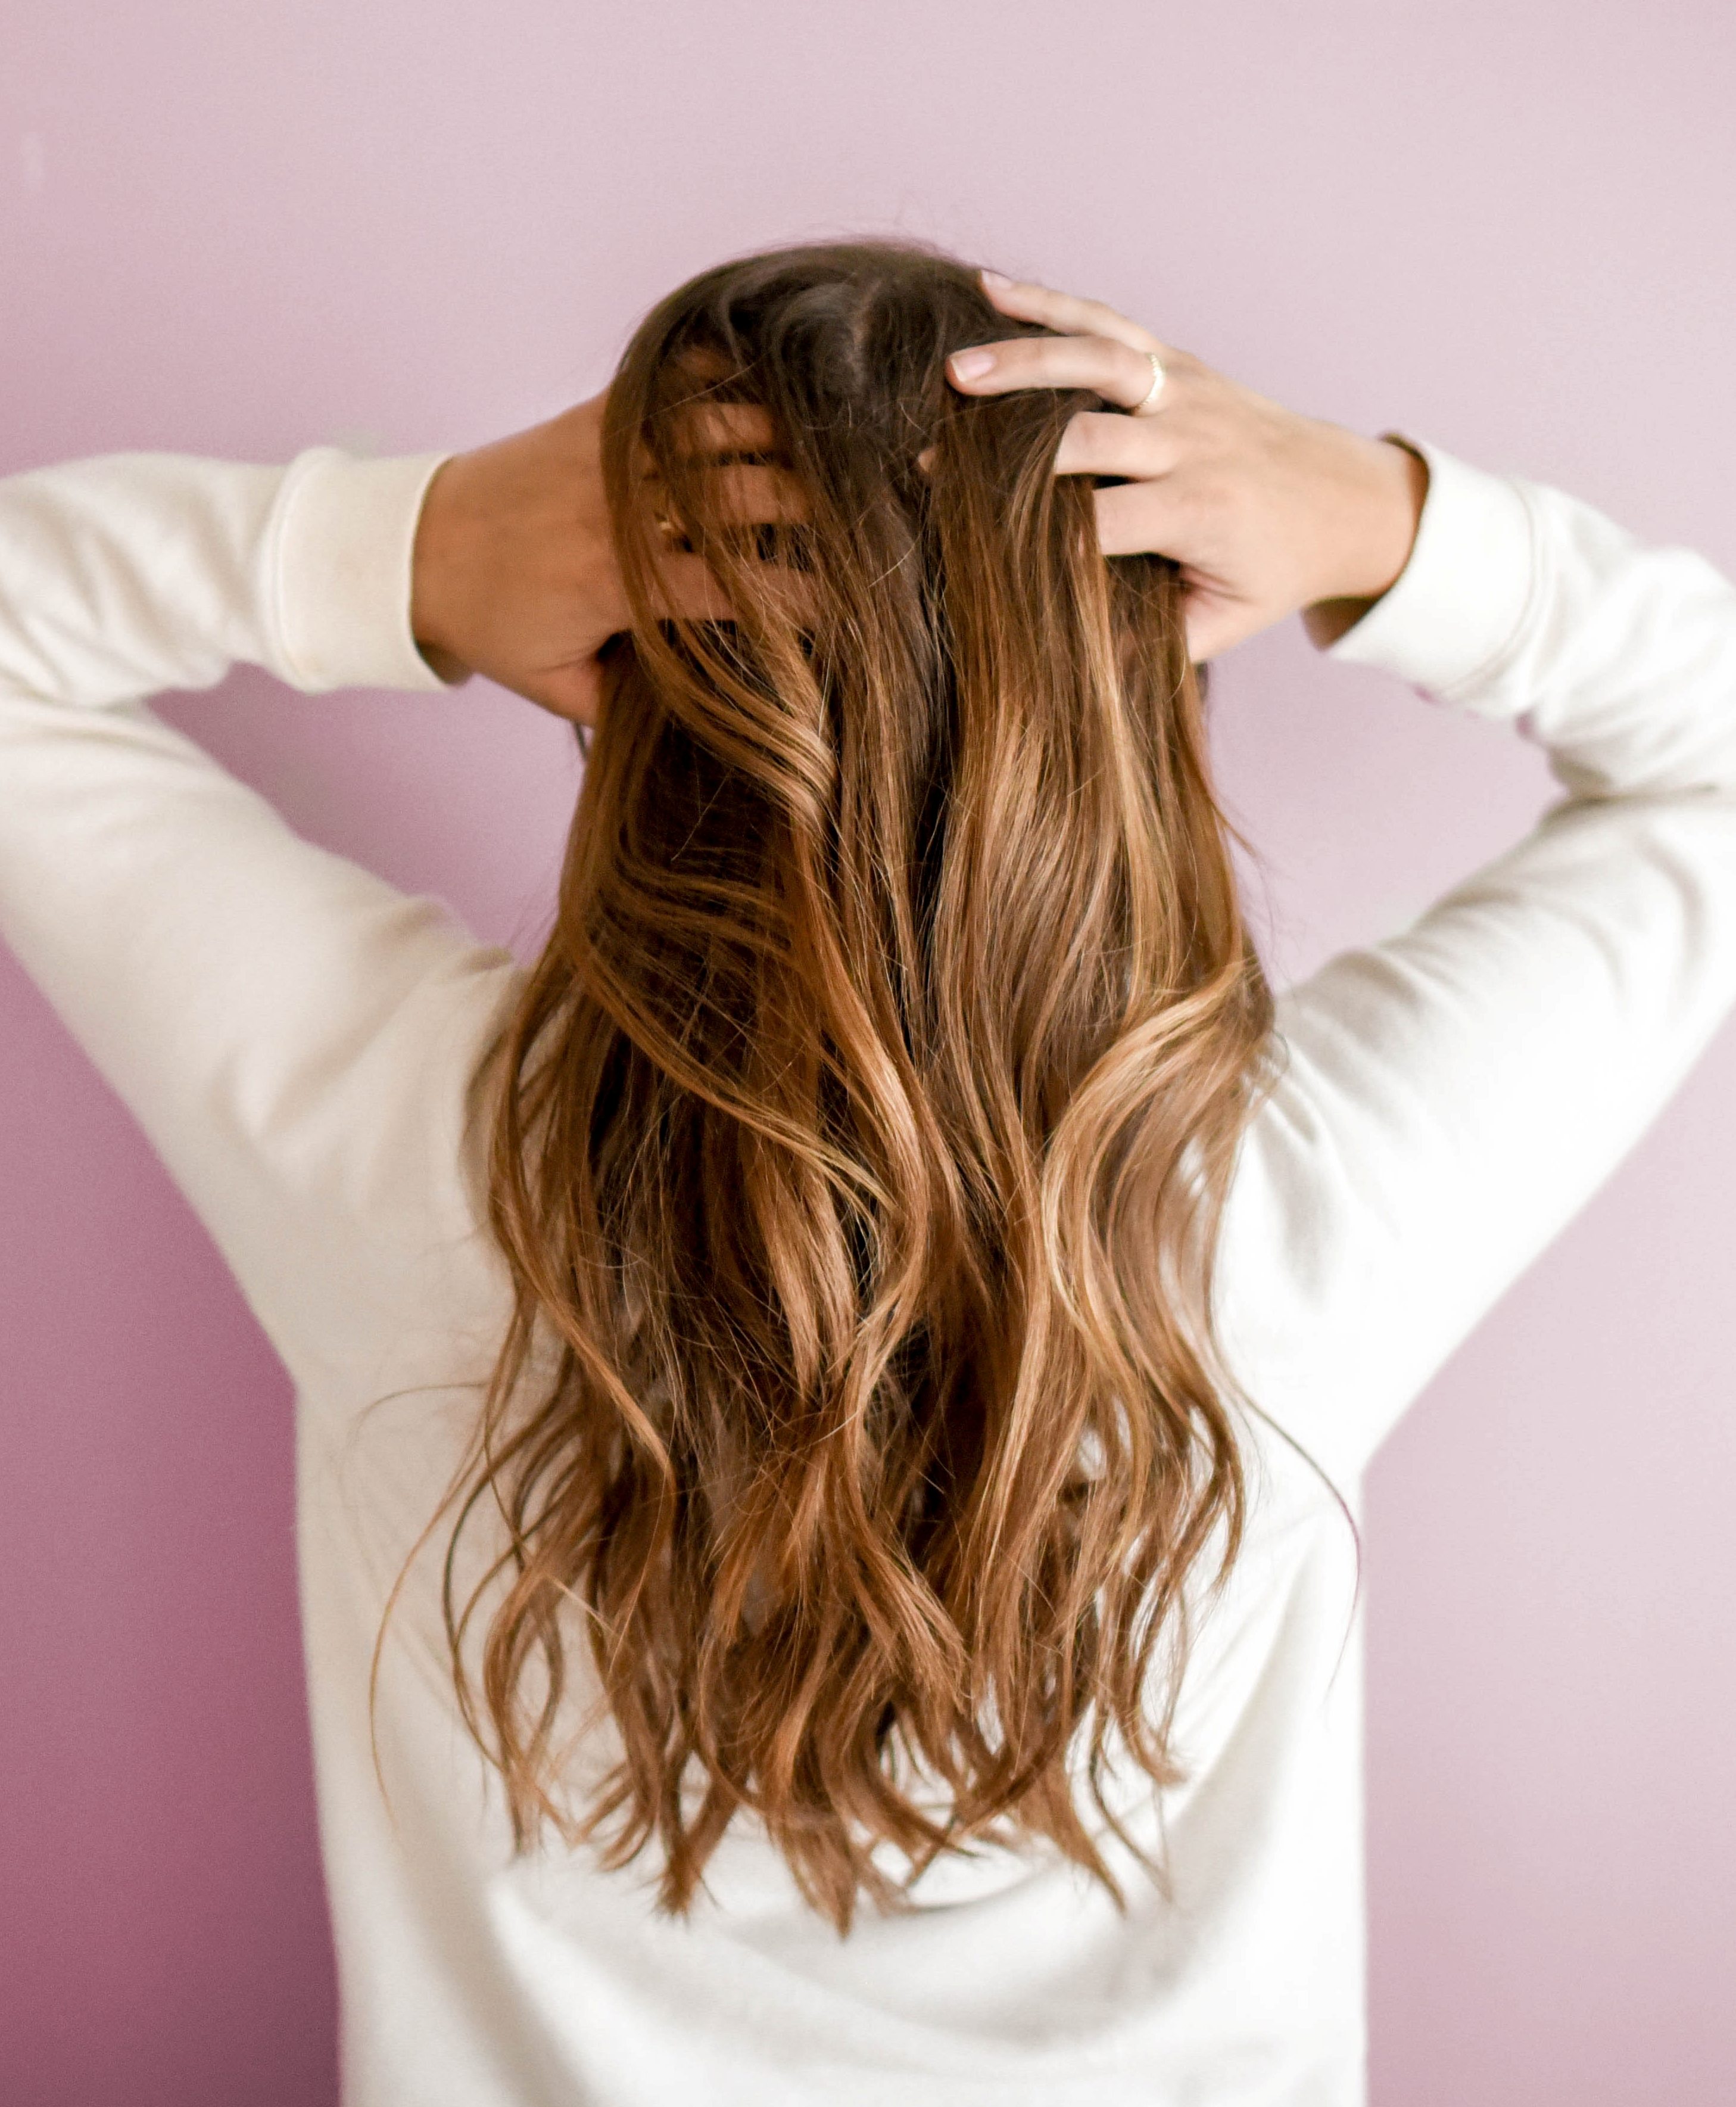 9 Tips to Get Rid of Oily Hair and Scalp with Home Remedies